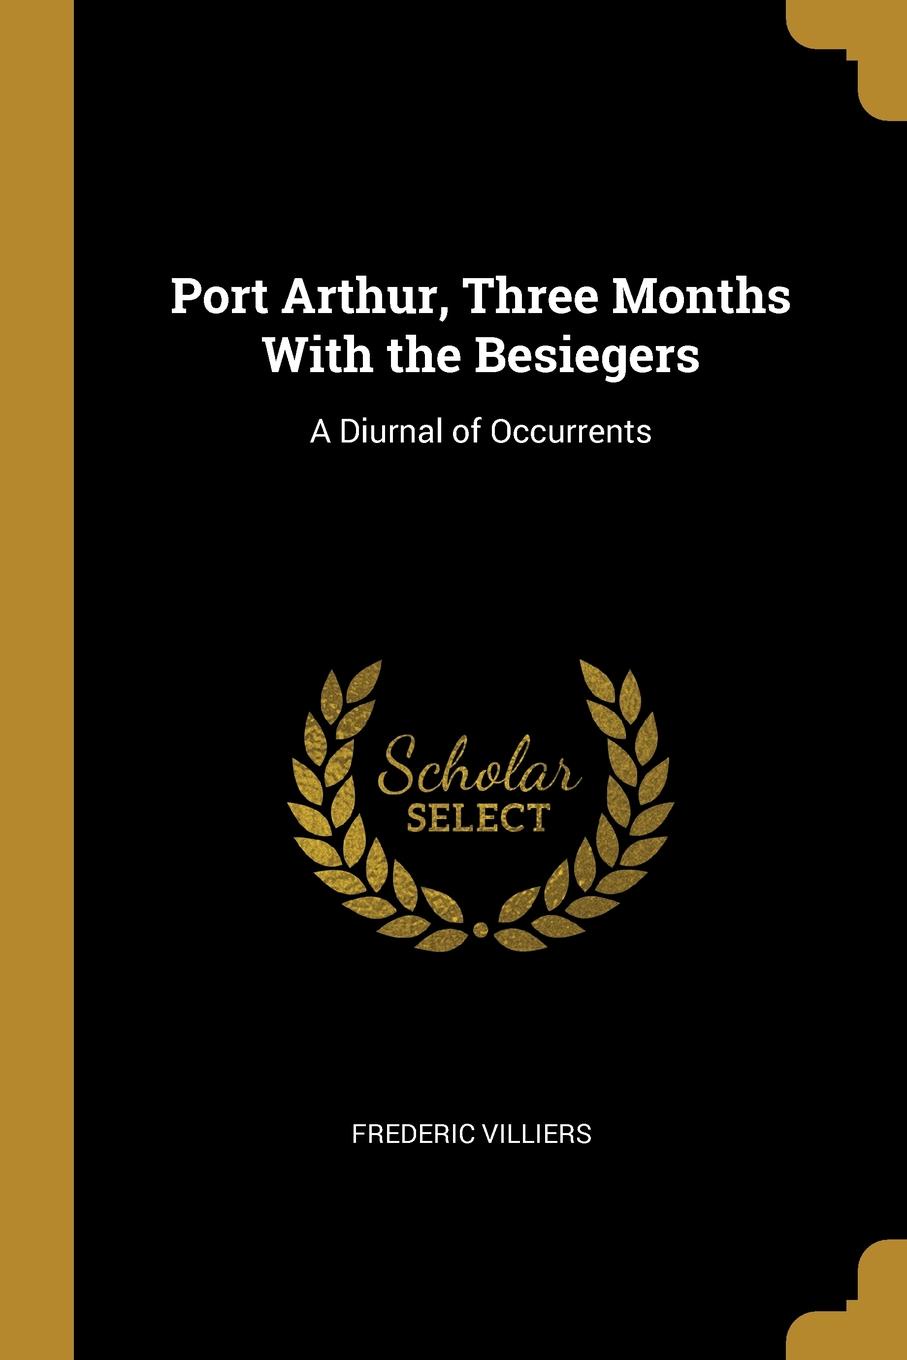 Port Arthur, Three Months With the Besiegers. A Diurnal of Occurrents